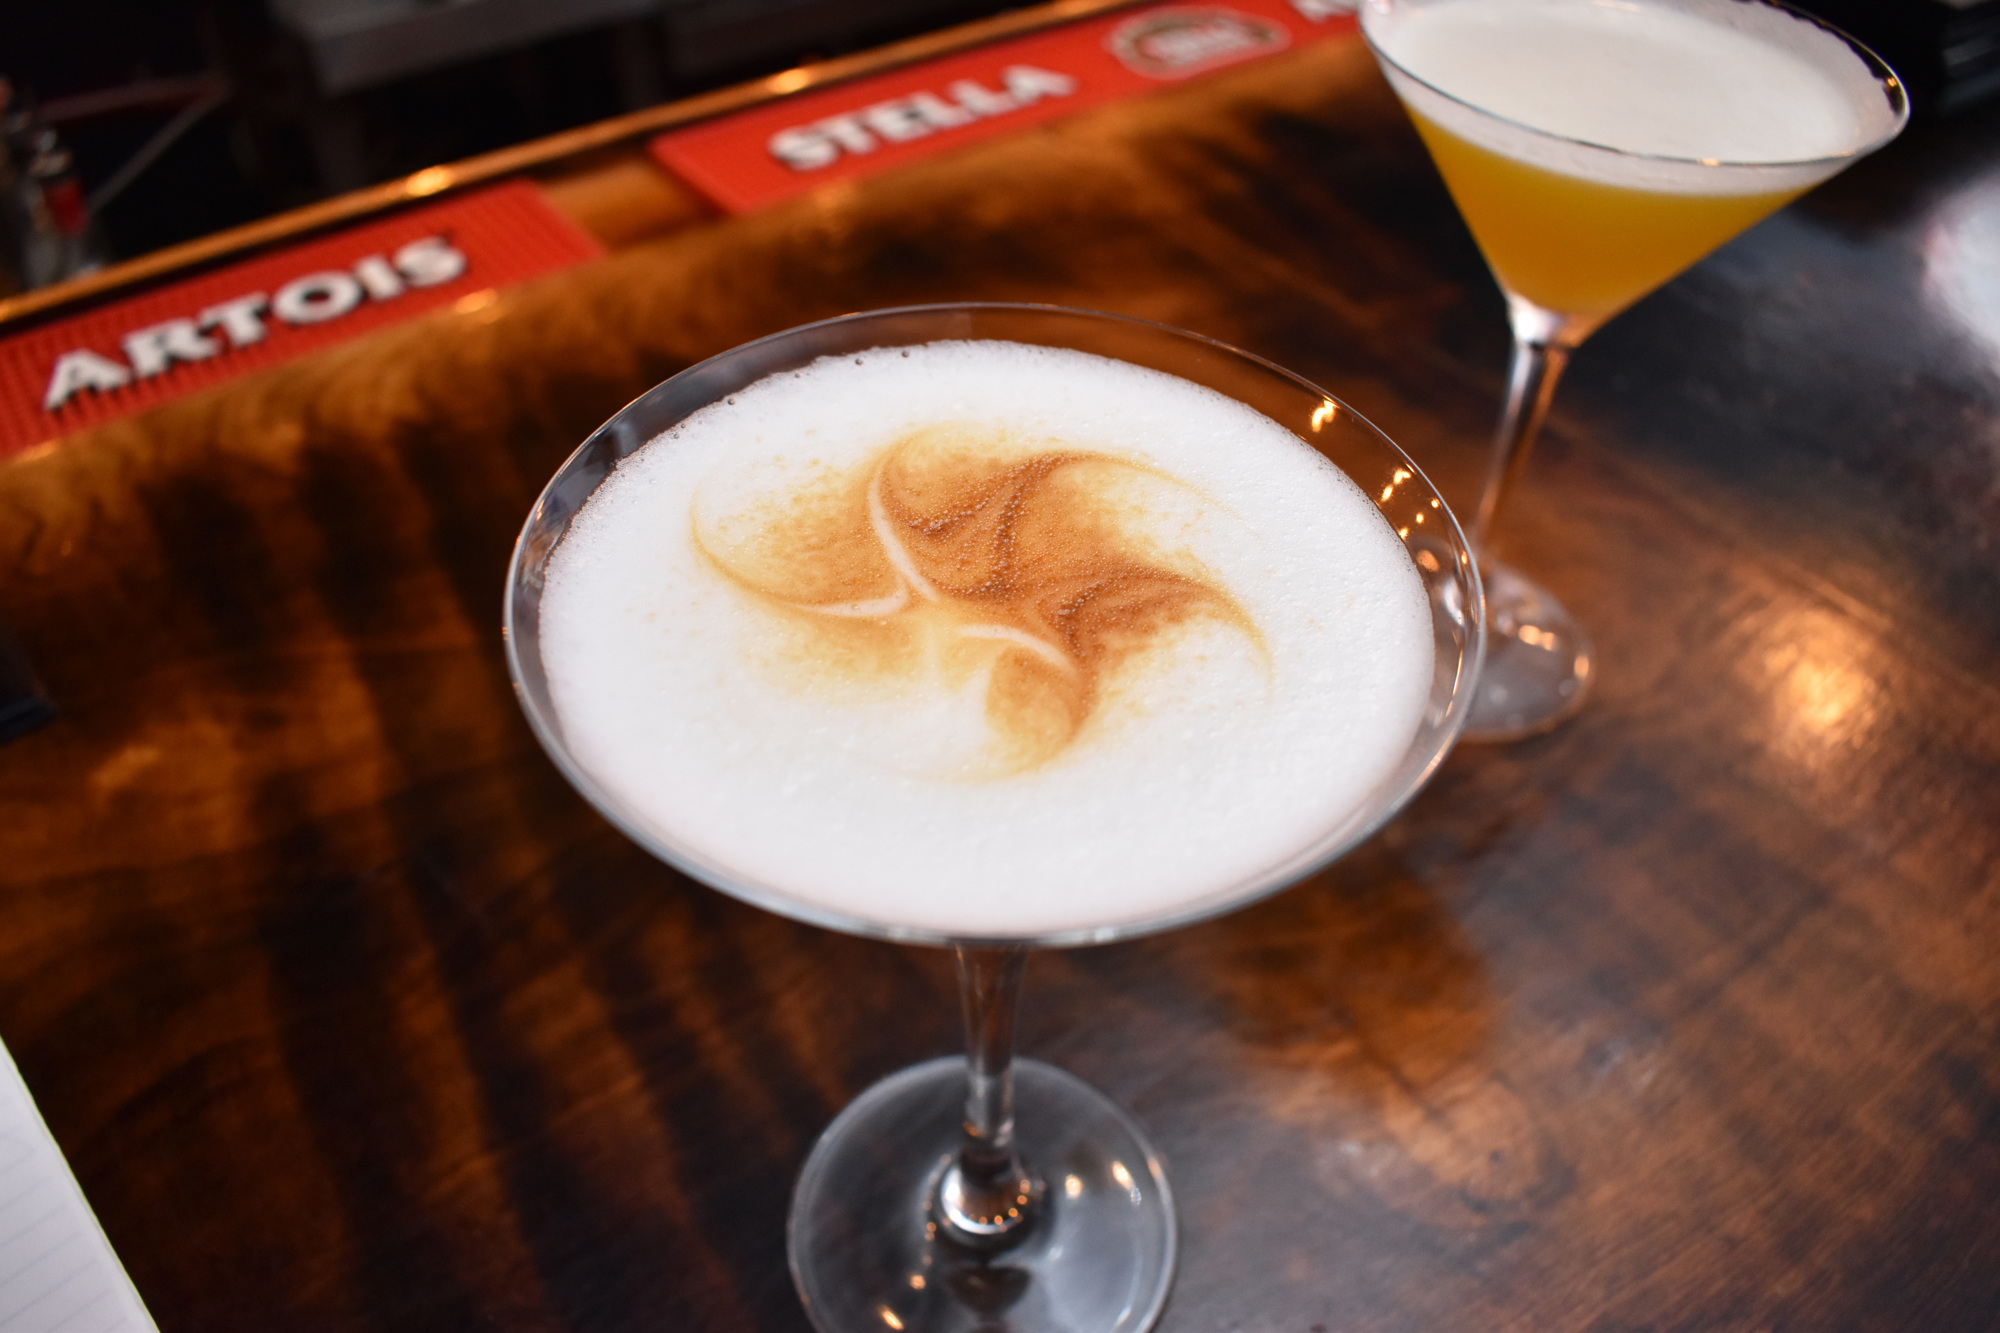 The Classic Pisco Sour is one of the most popular happy hour drinks at Brasa & Pisco. Photo by NIki Kottmann